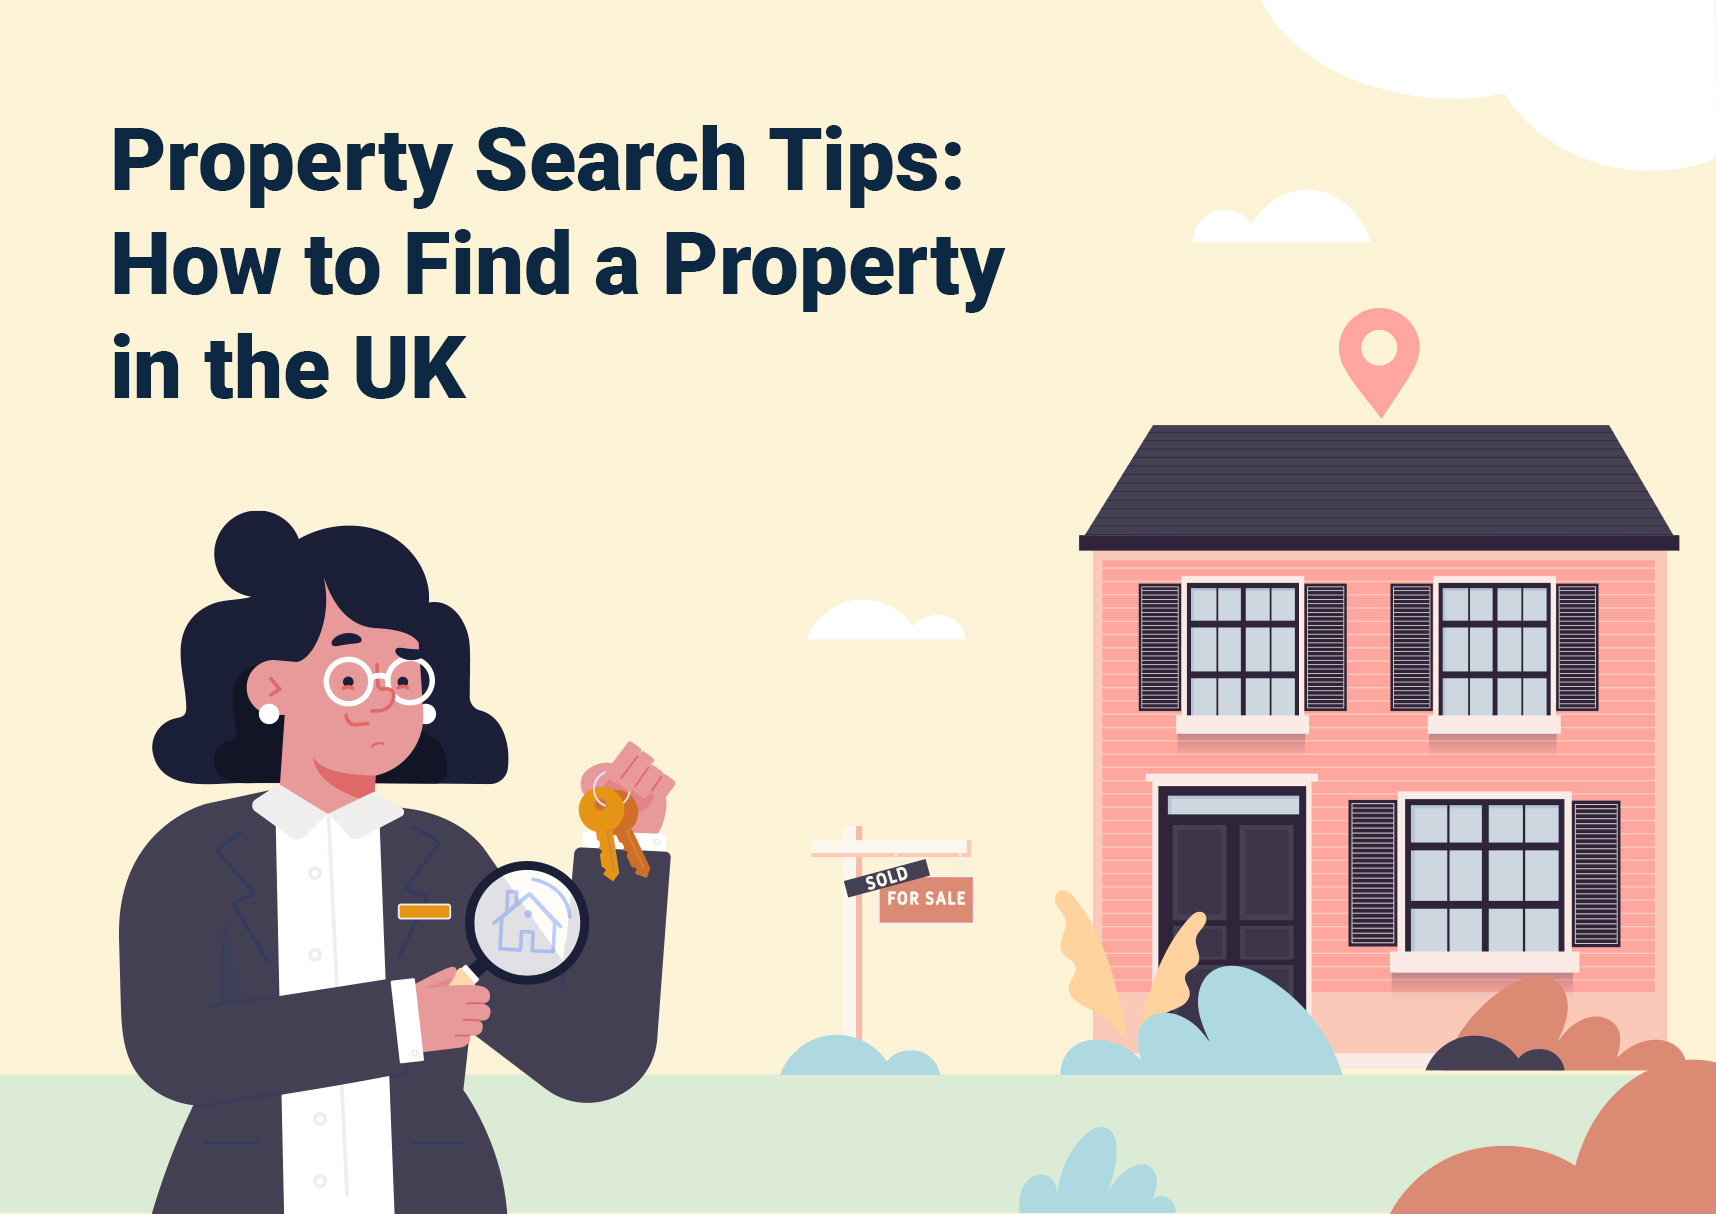 Property Search Tips: How to Find a Property in the UK